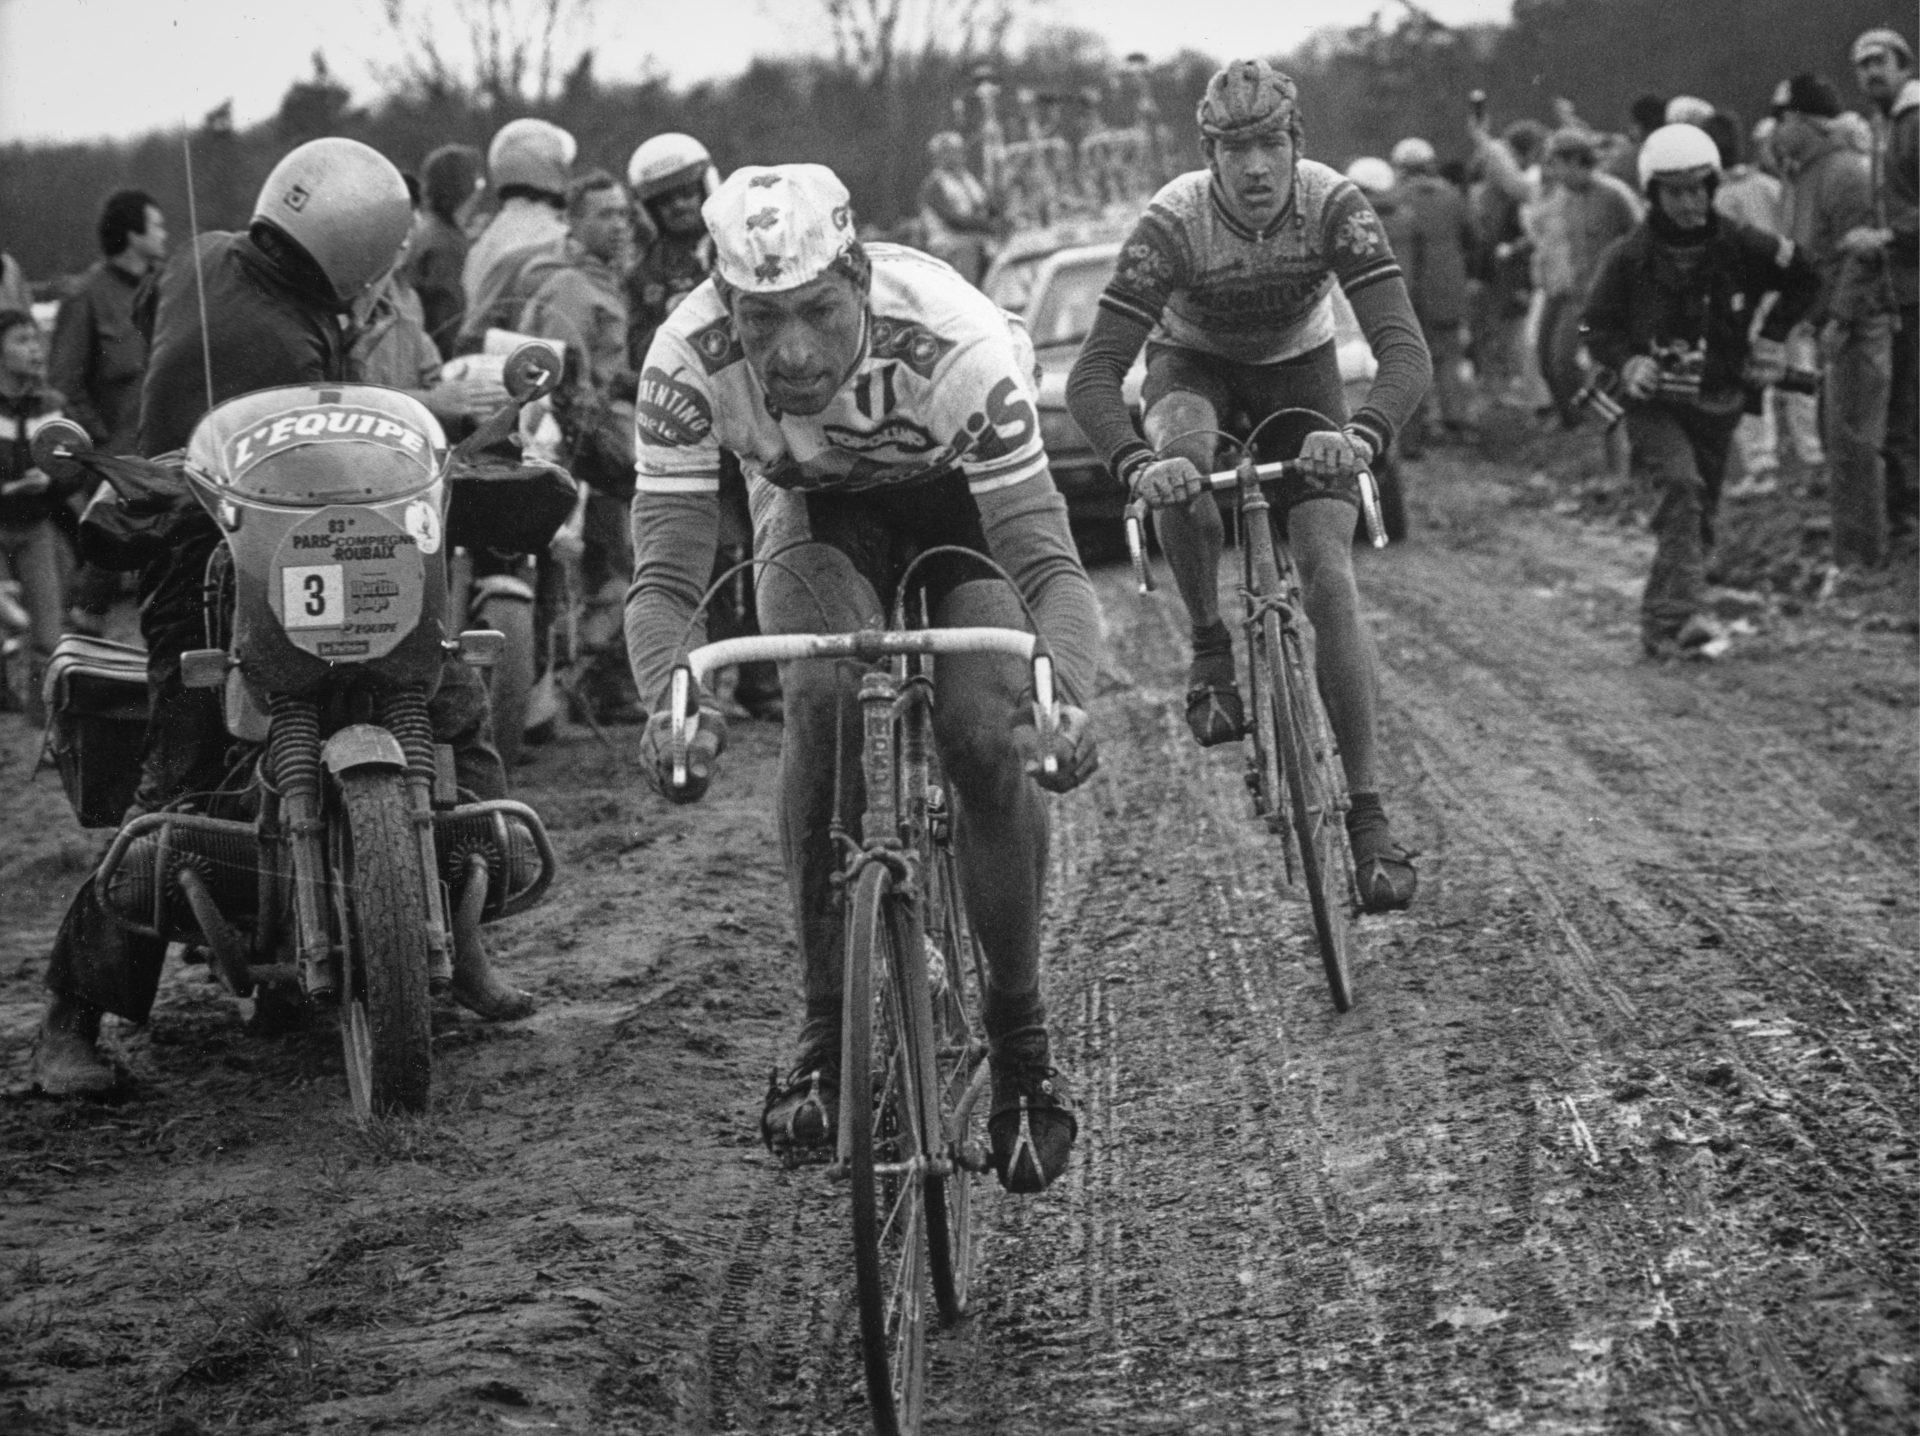 Sean Kelly rides in a historical, muddy, edition of Paris-Roubaix.